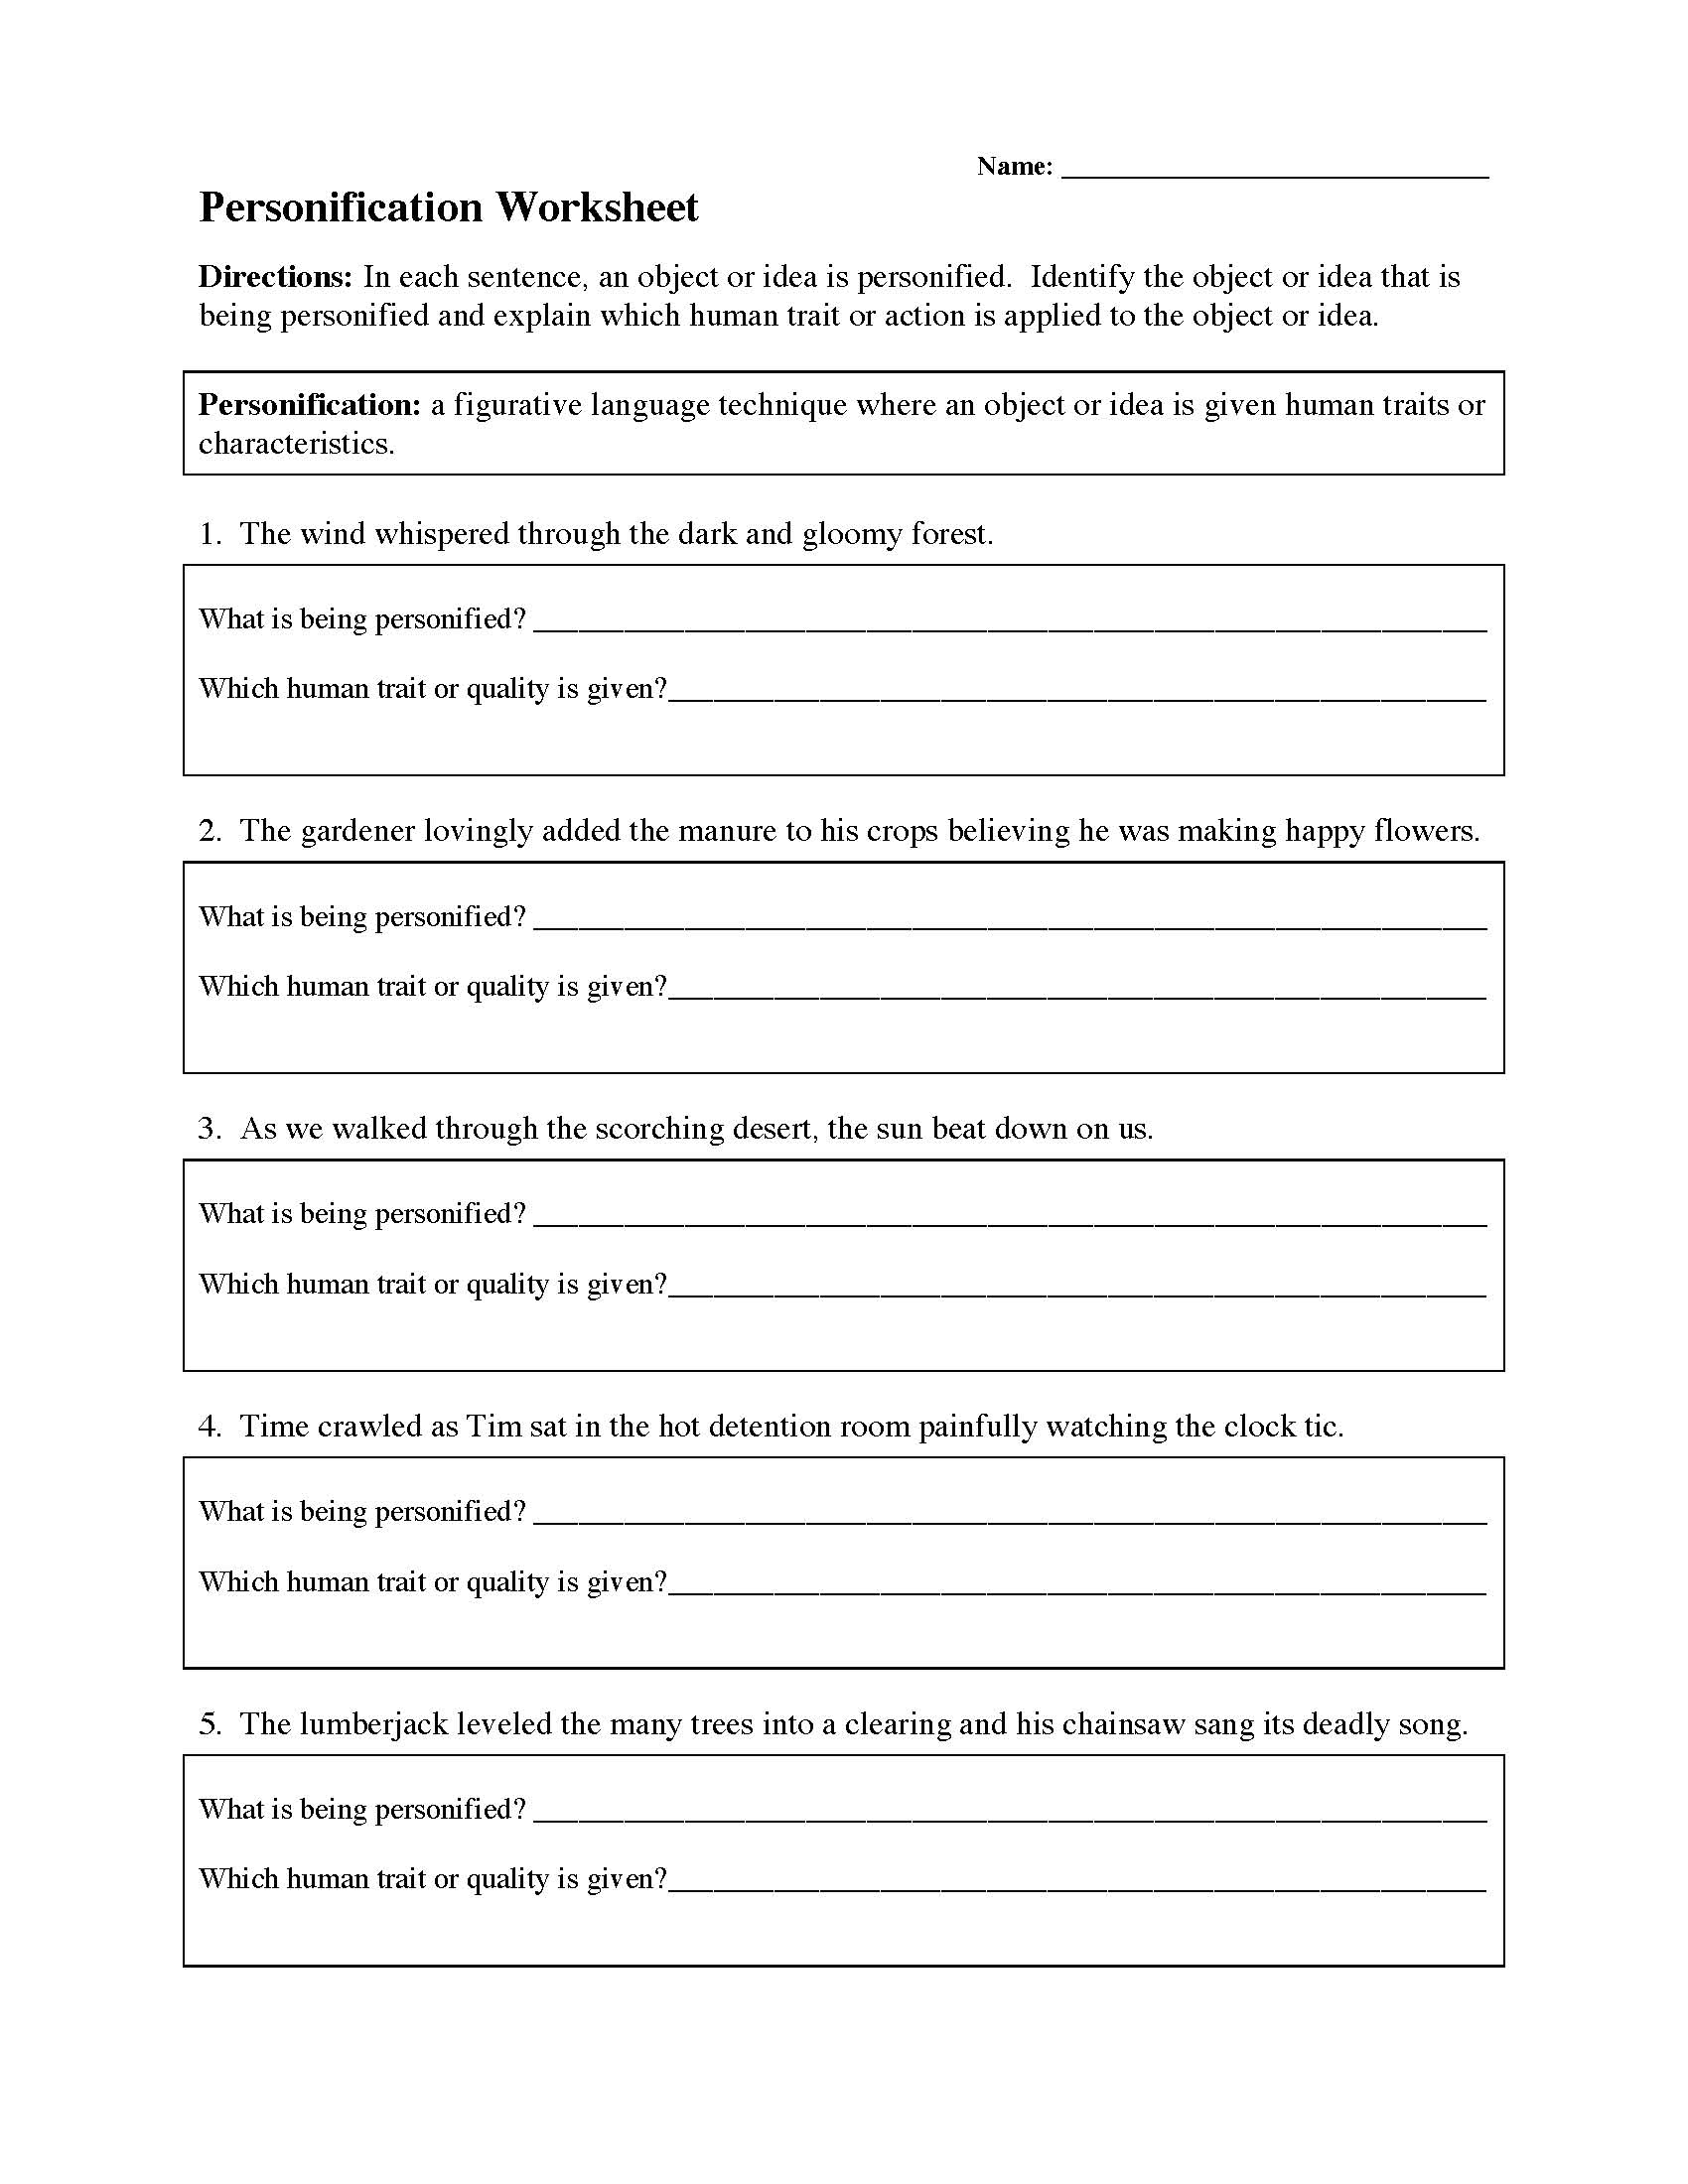 This is a preview image of Personification Worksheet 1. Click on it to enlarge it or view the source file.